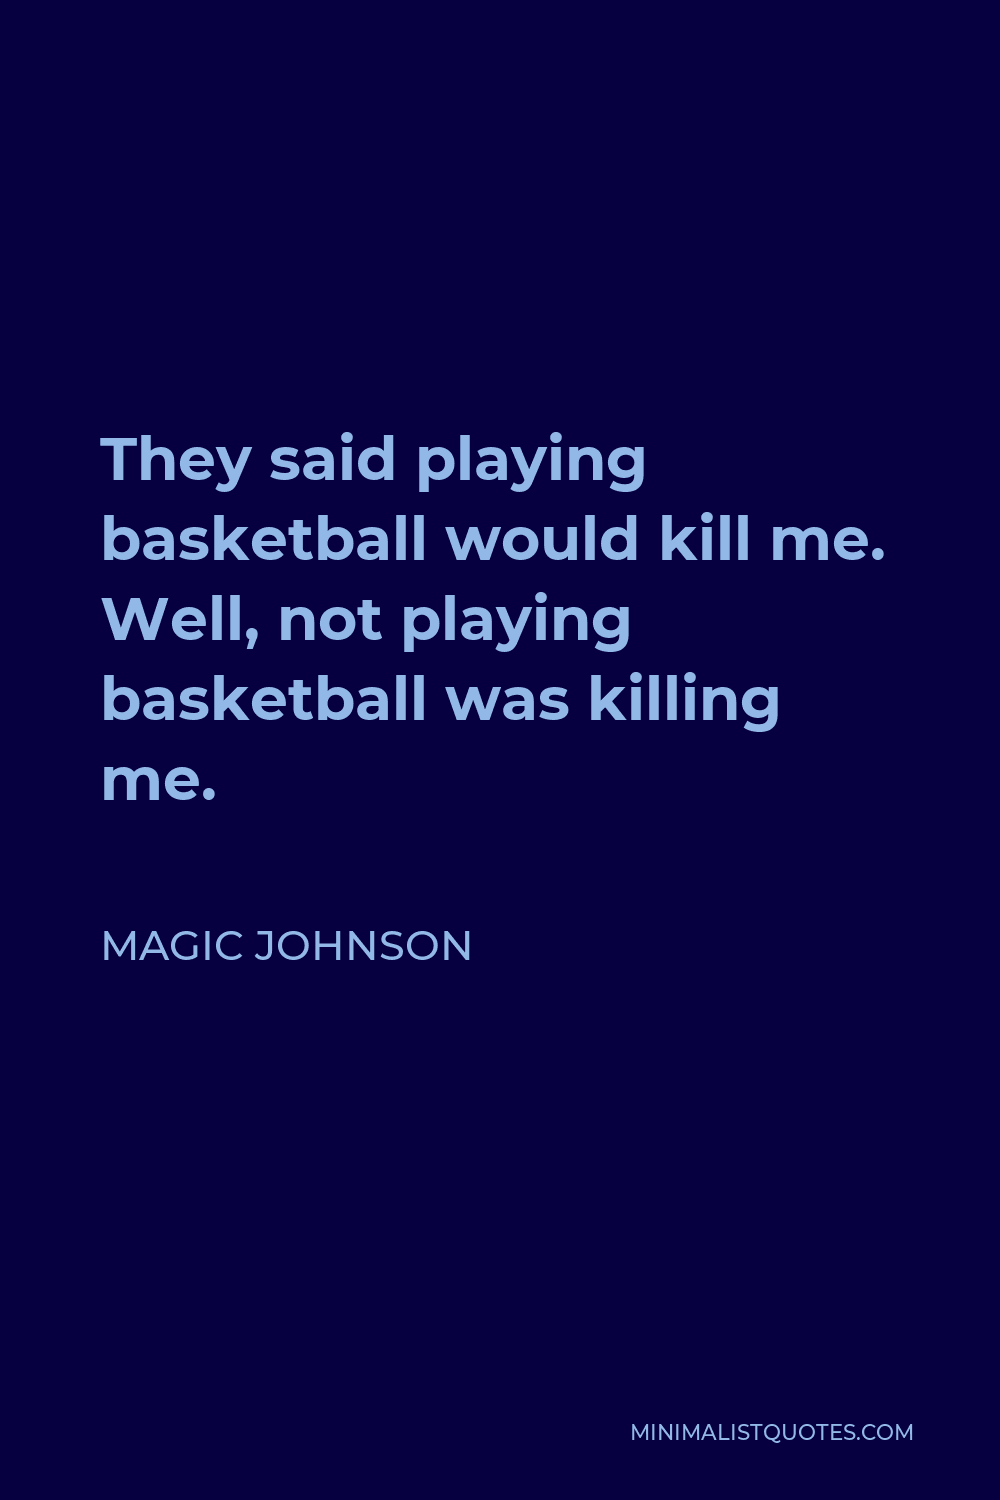 Magic Johnson Quote - They said playing basketball would kill me. Well, not playing basketball was killing me.